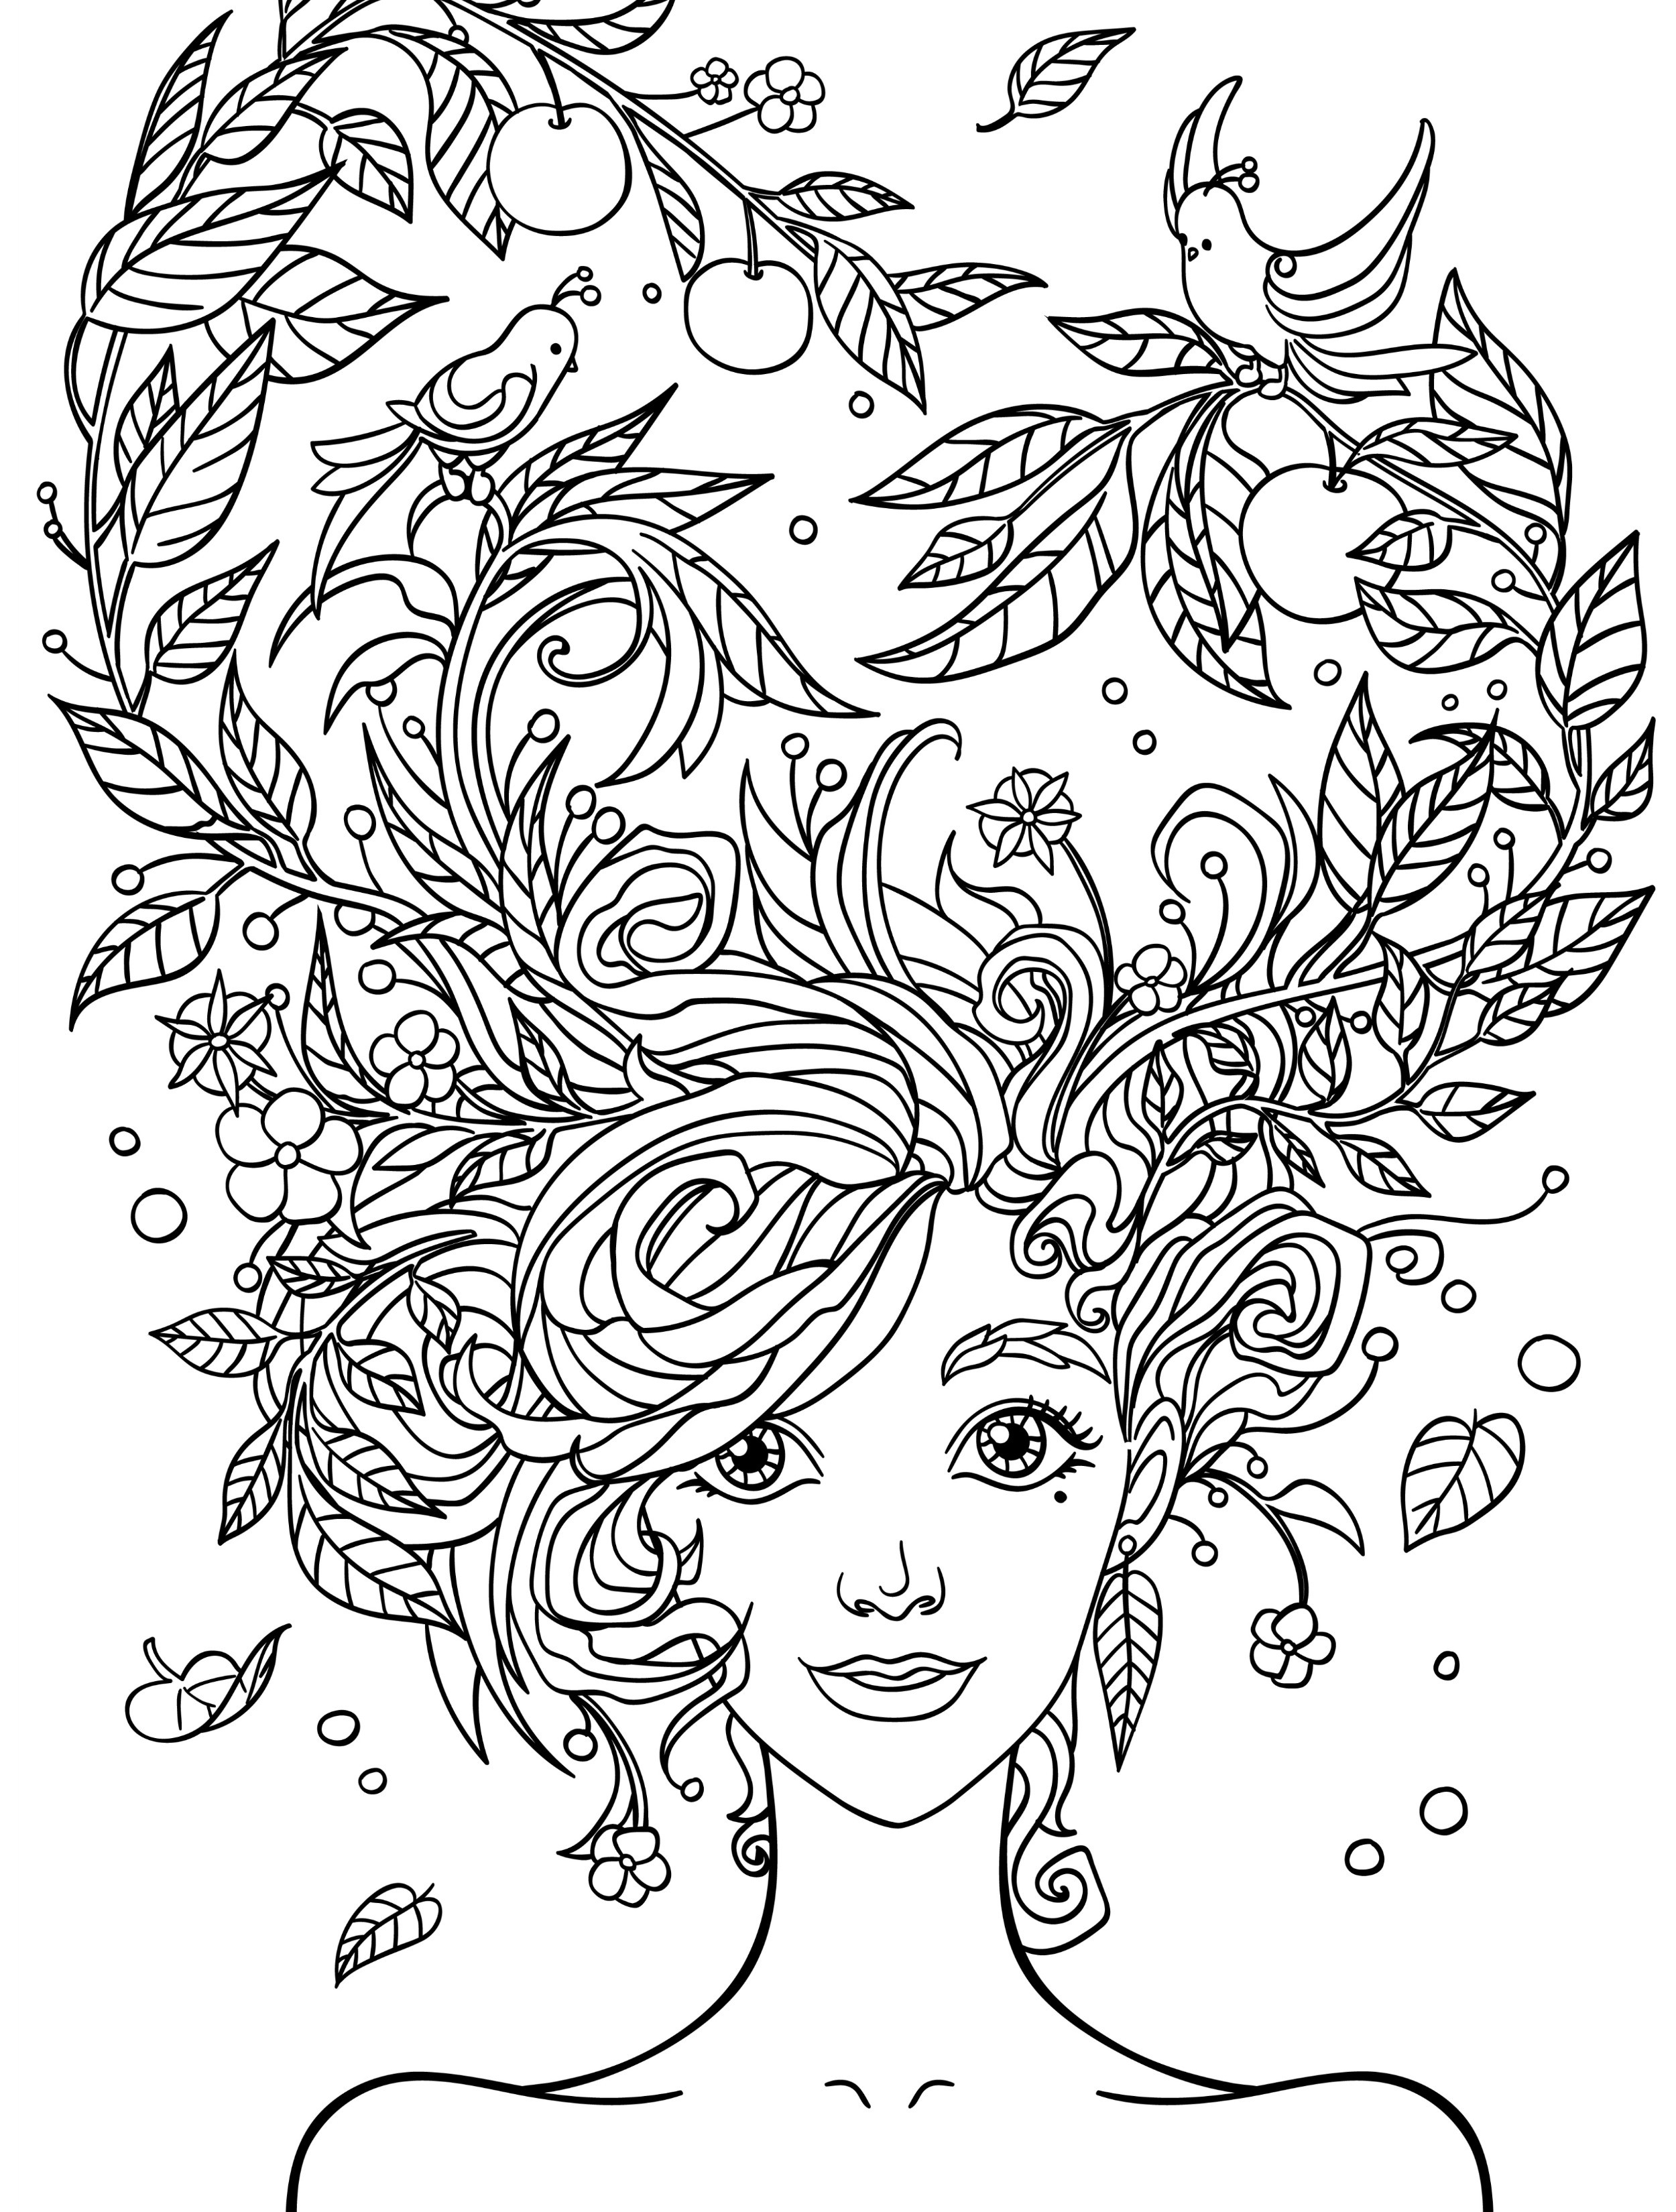 Pretty Girl Coloring Pages To Print
 10 Crazy Hair Adult Coloring Pages Page 5 of 12 Nerdy